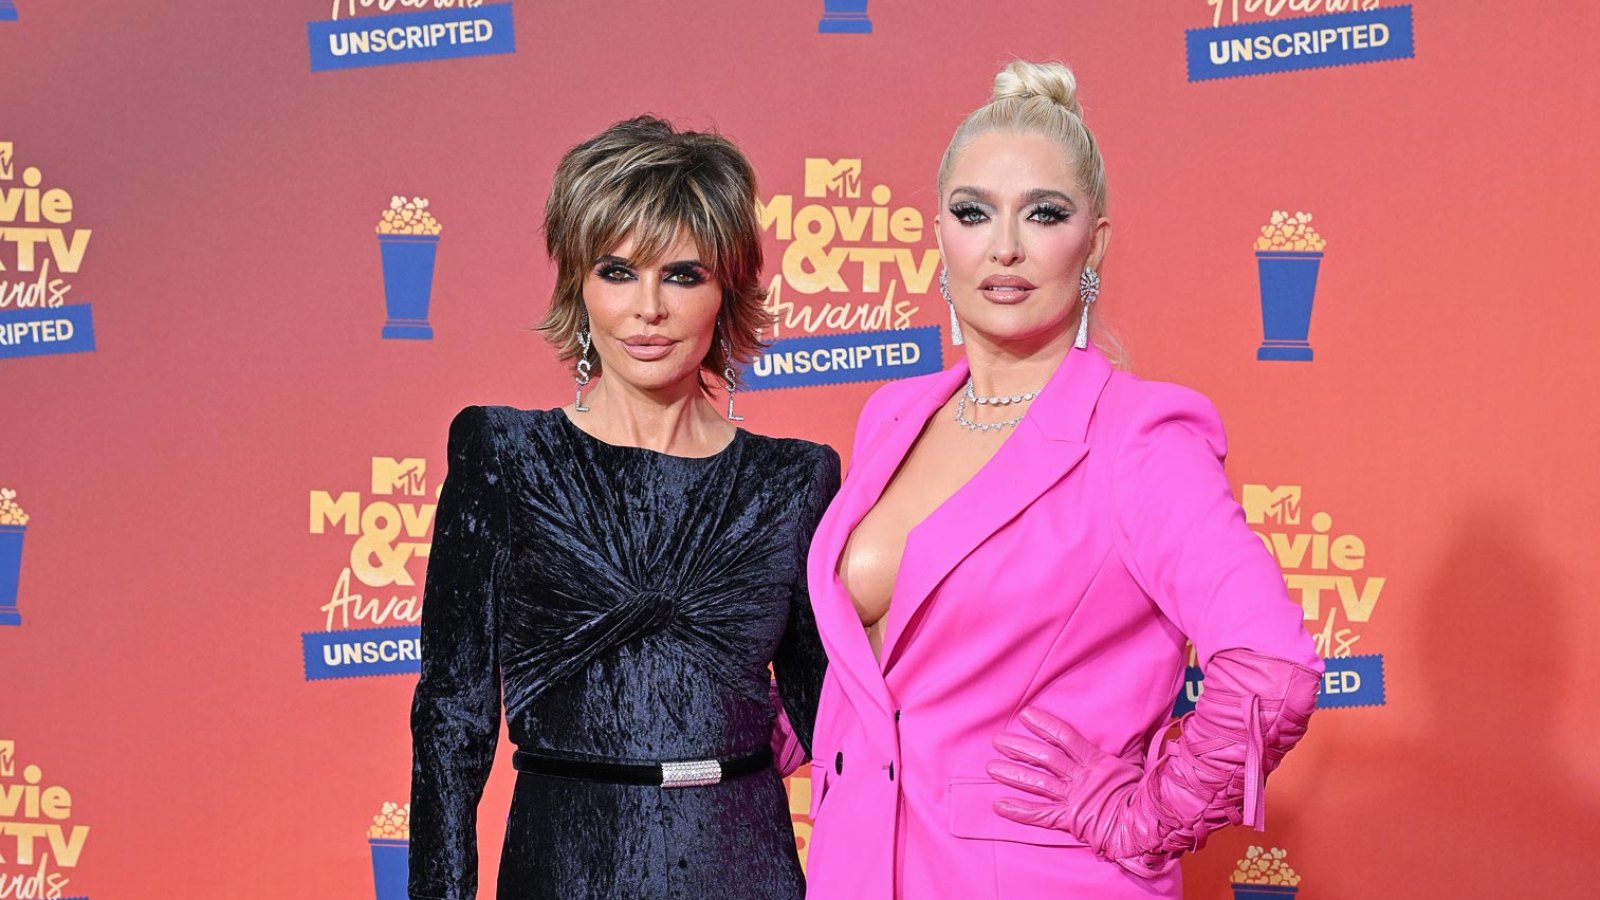 Lisa Rinna Attends Erika Jayne s Las Vegas Show With Kyle and Dorit After Her RHOBH Exit 315